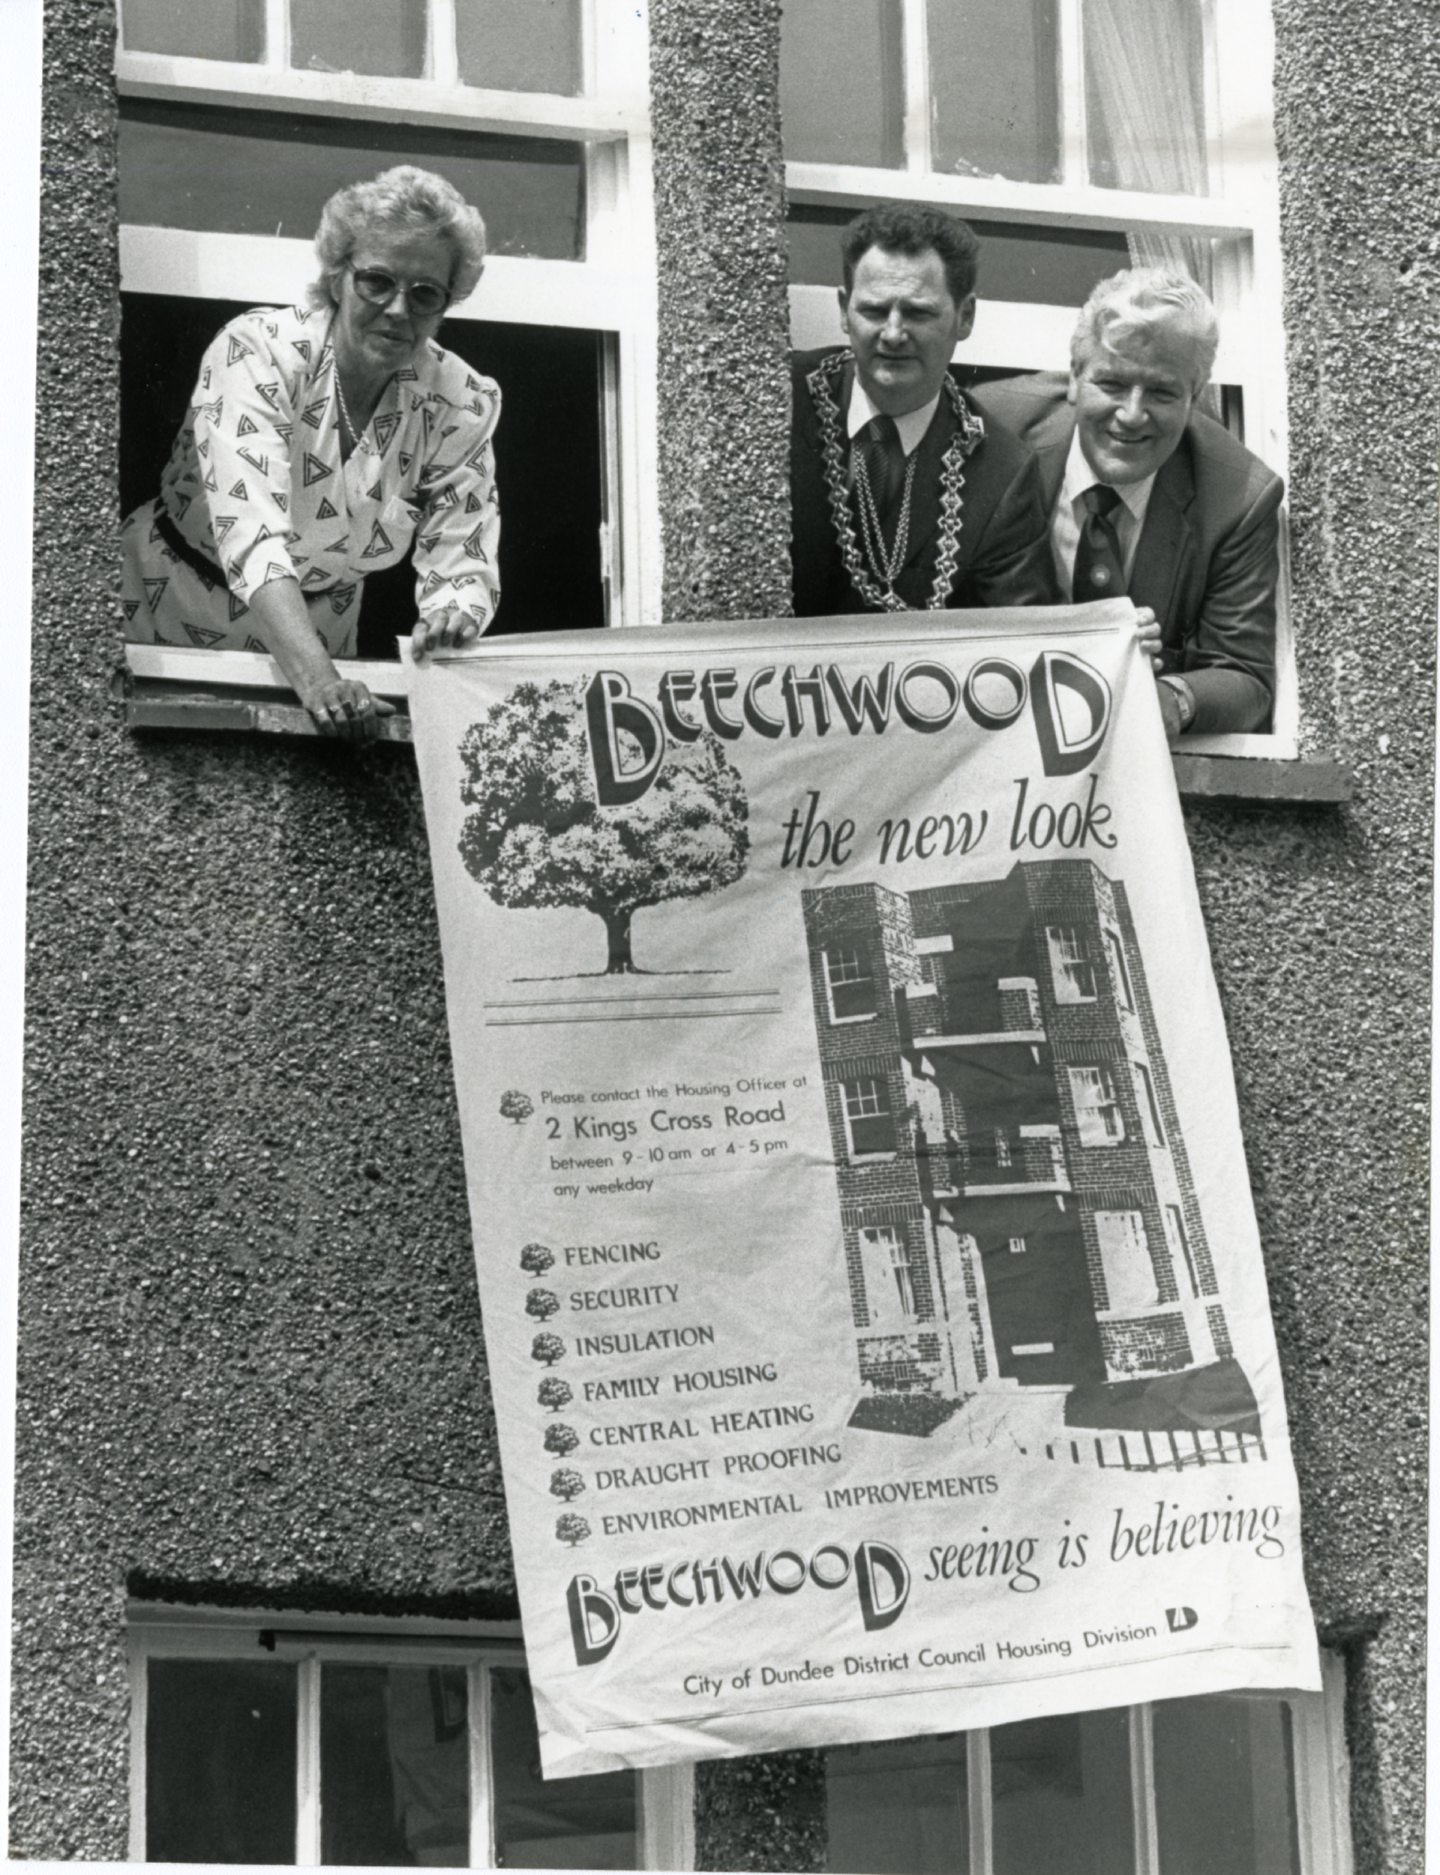 Things started to get better in Beechwood following the efforts of people like Councillor Charles Farquhar.